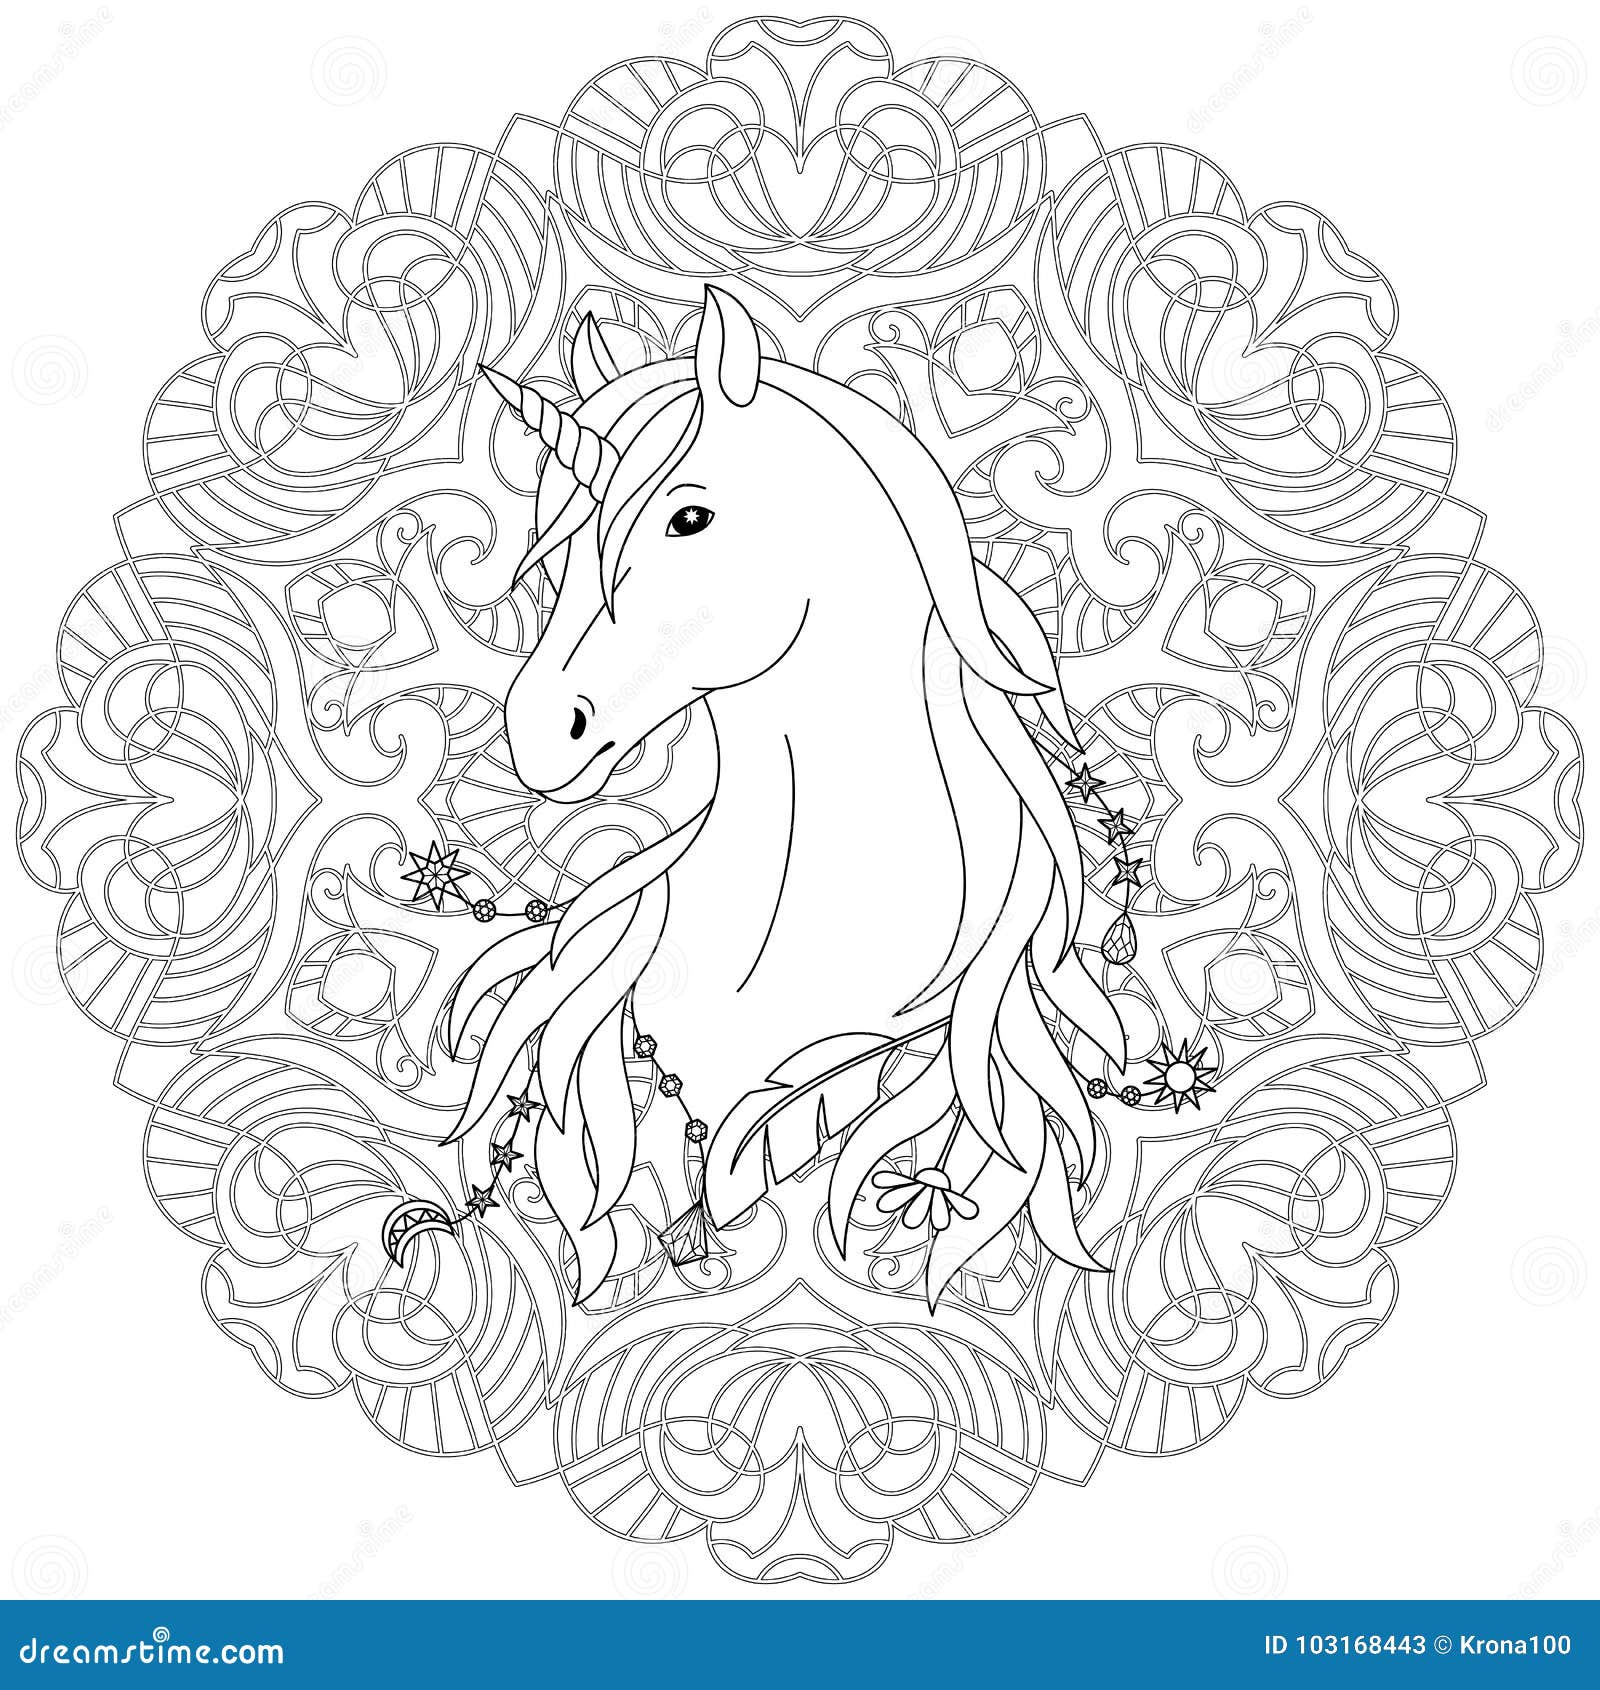 Unicorn Tattoo Coloring Page Stock Vector Illustration Of Romantic Mystical 103168443